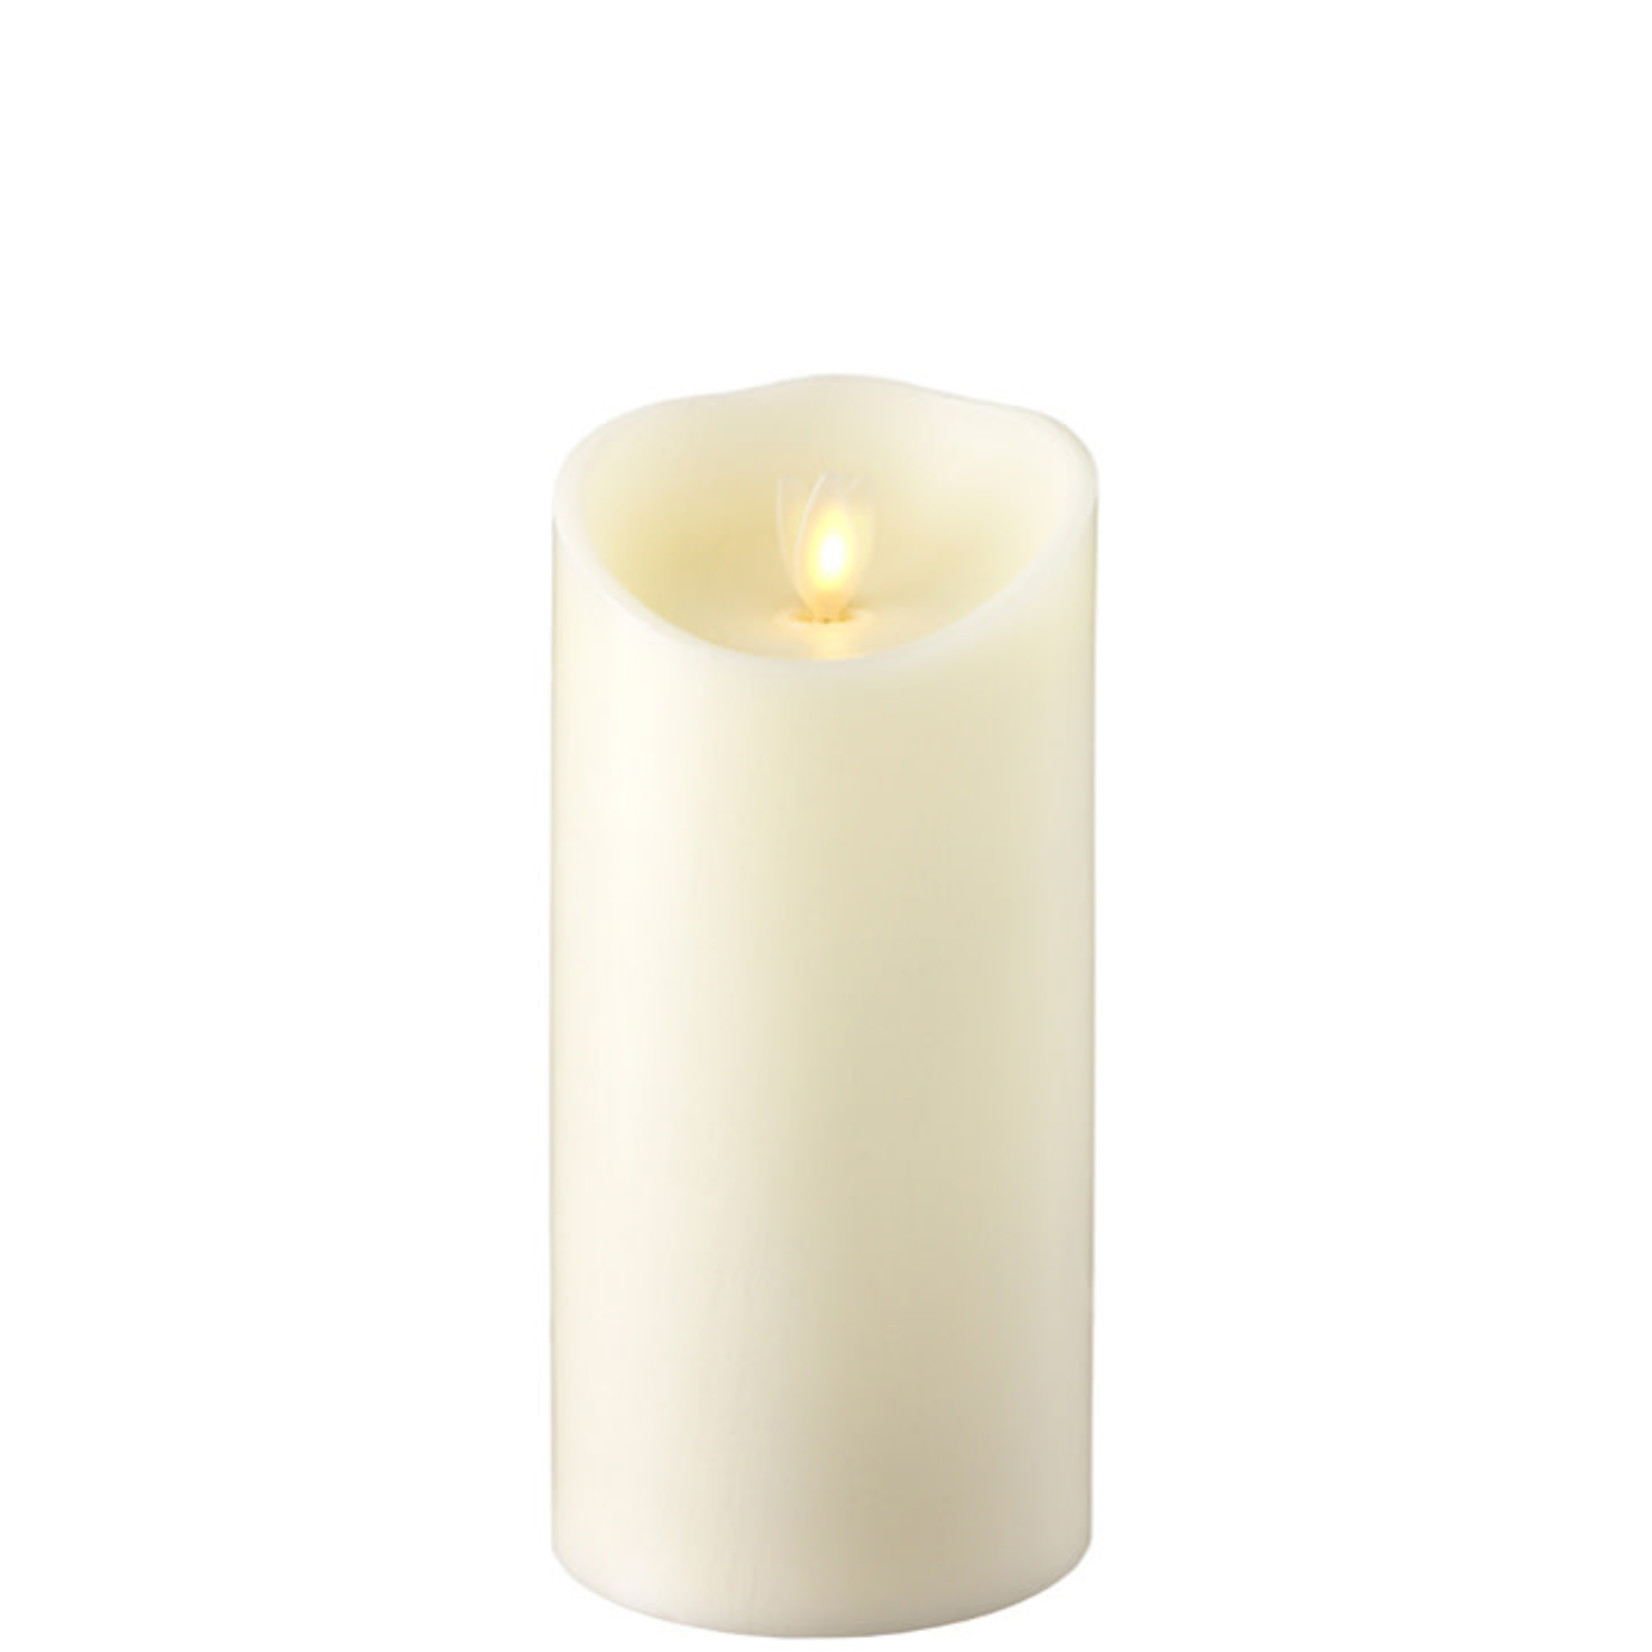 MOVING FLAME IVORY PILLAR CANDLE